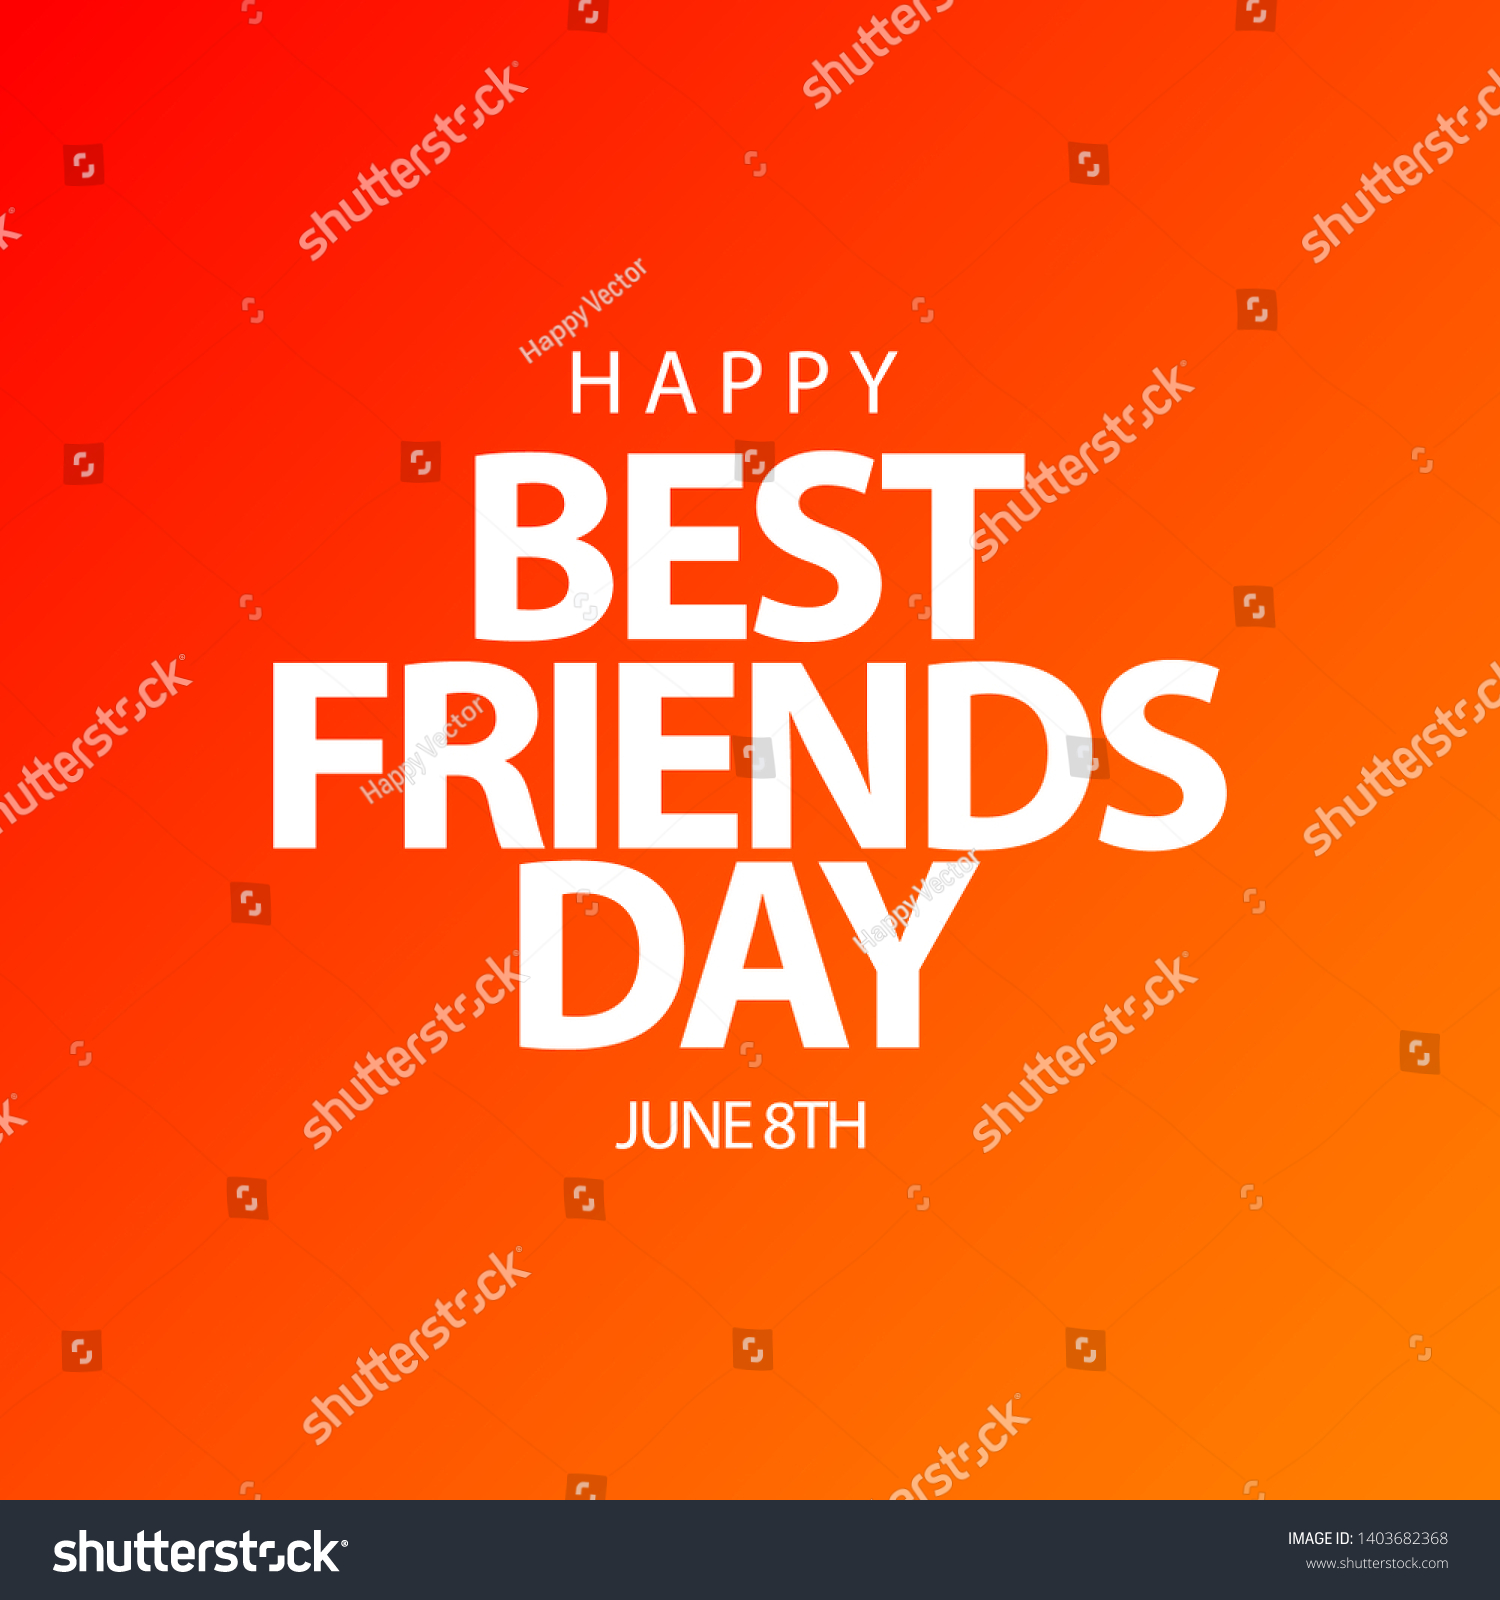 BEST FRIENDS DAY vector template. Design illustration for banner, advertising, greeting cards or print. #1403682368